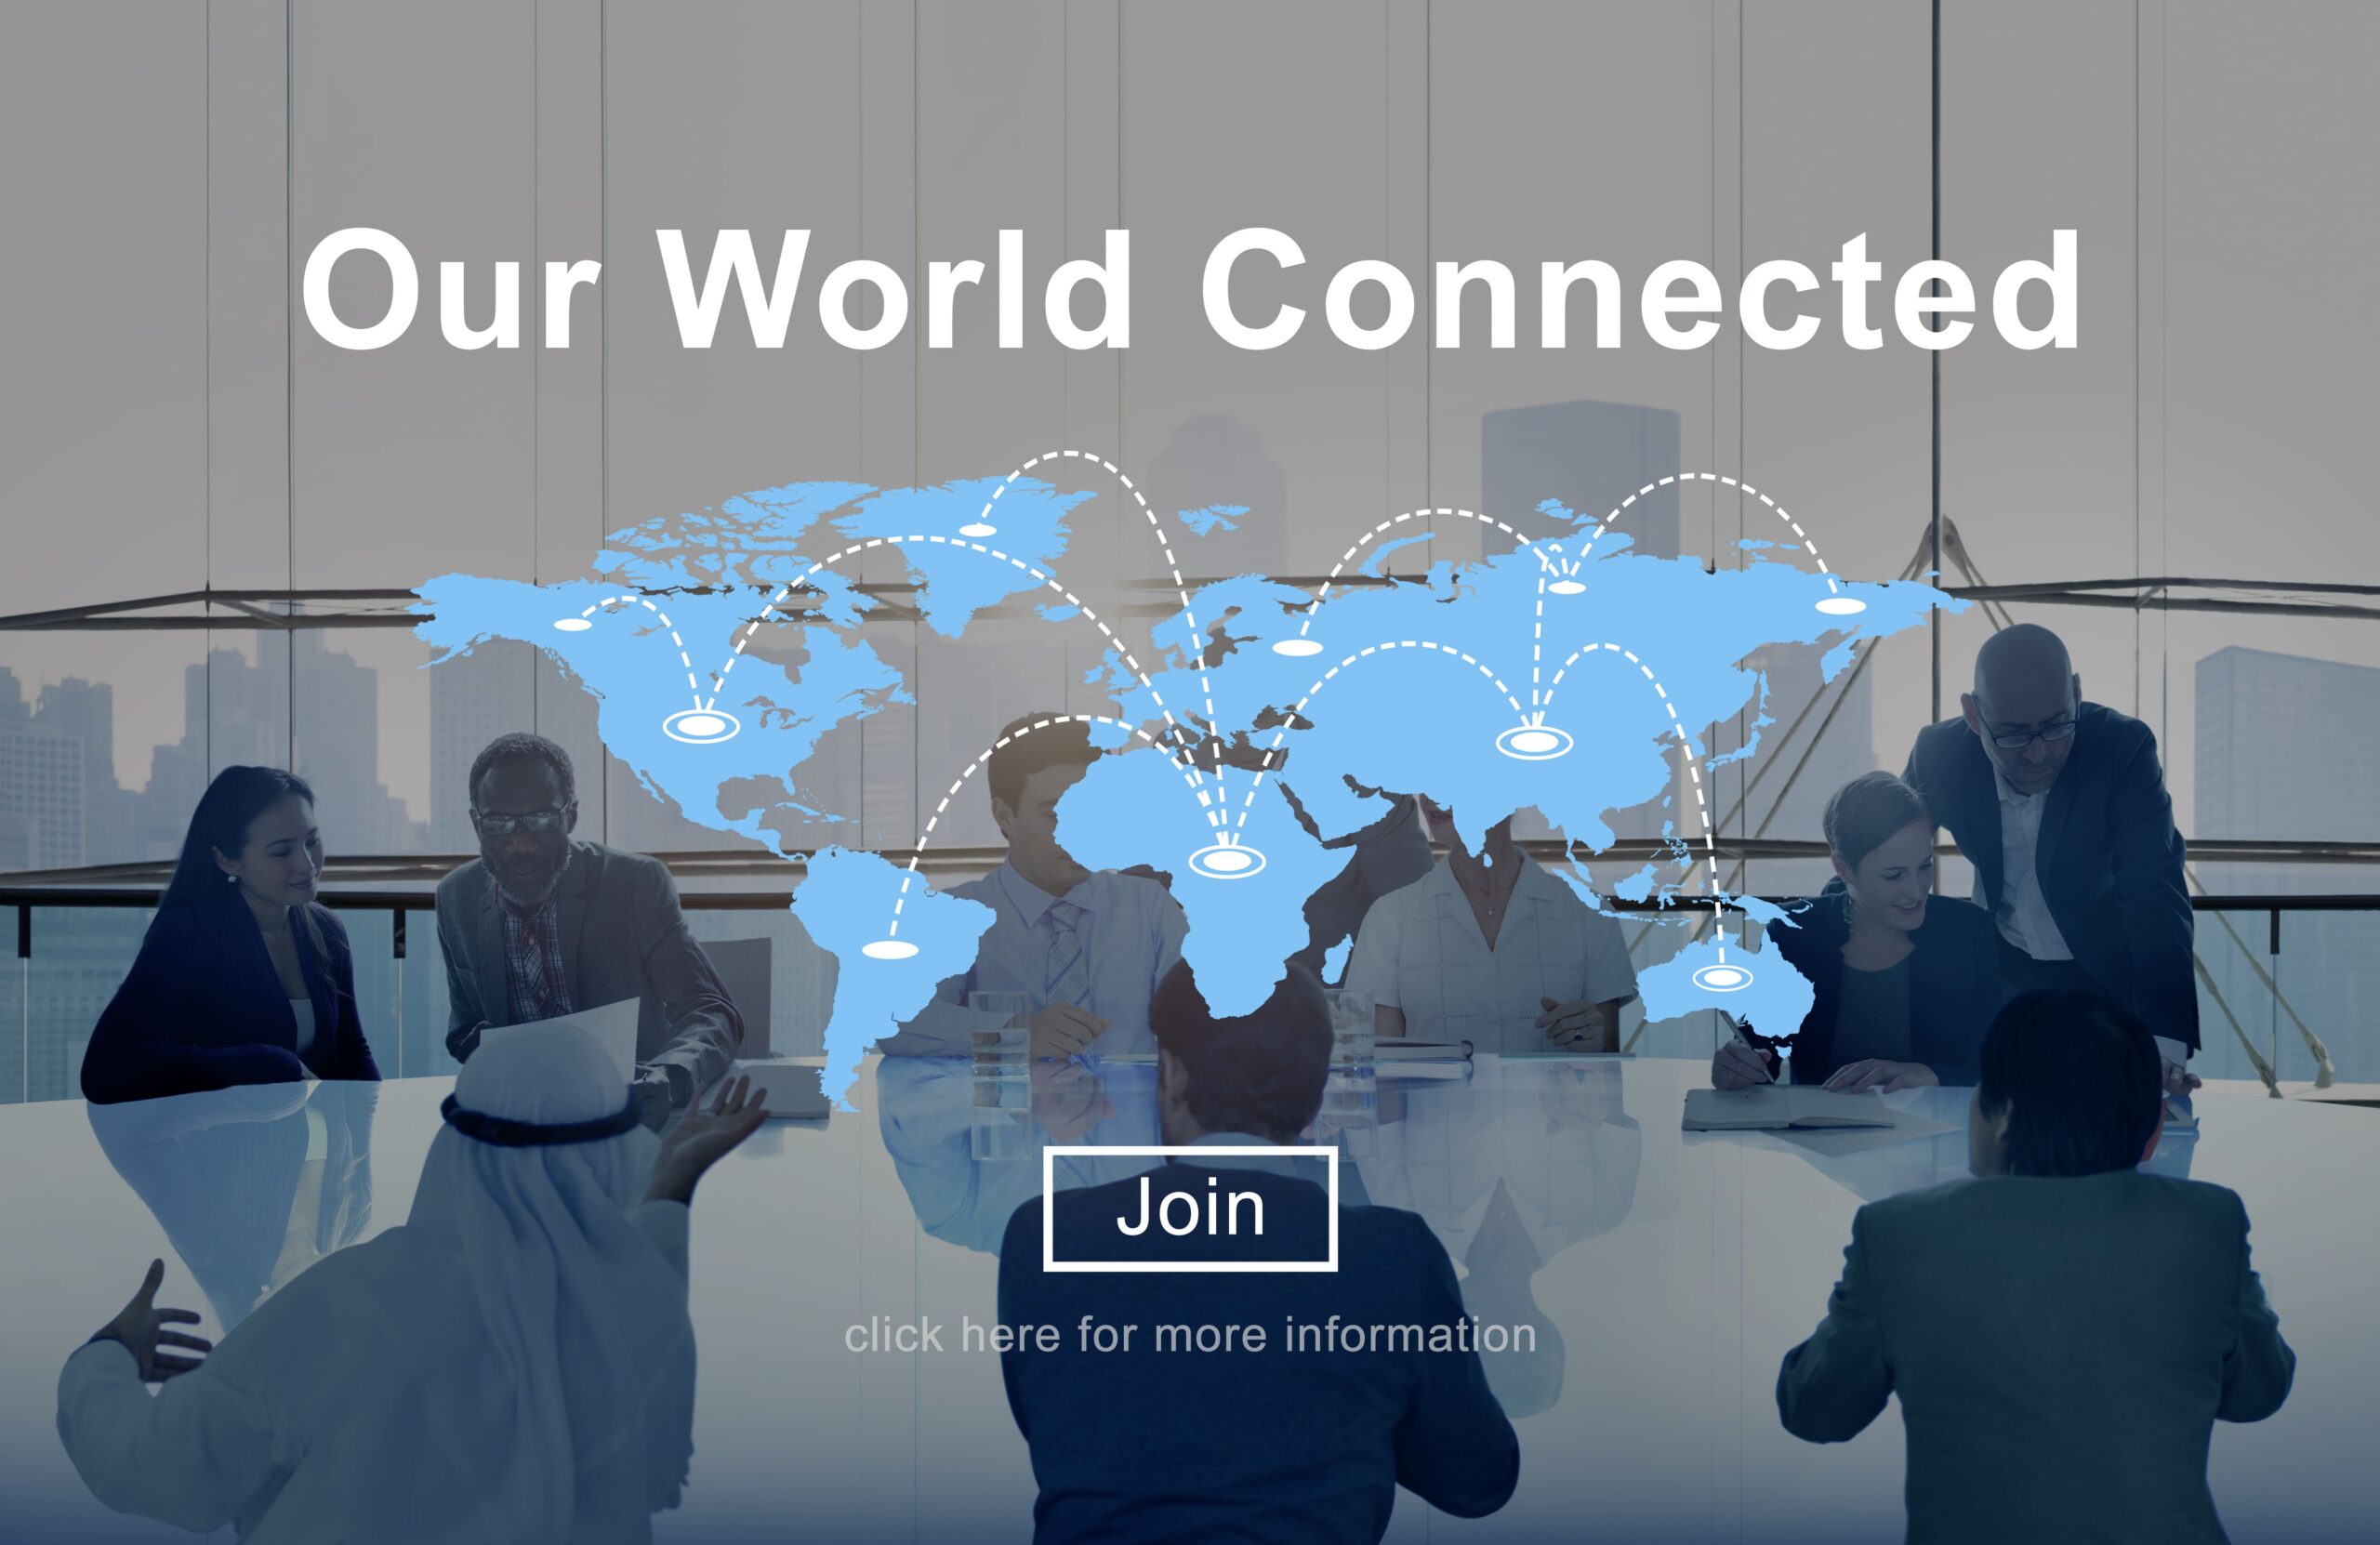 our-world-connected-social-networking-interconnection-concept (1)